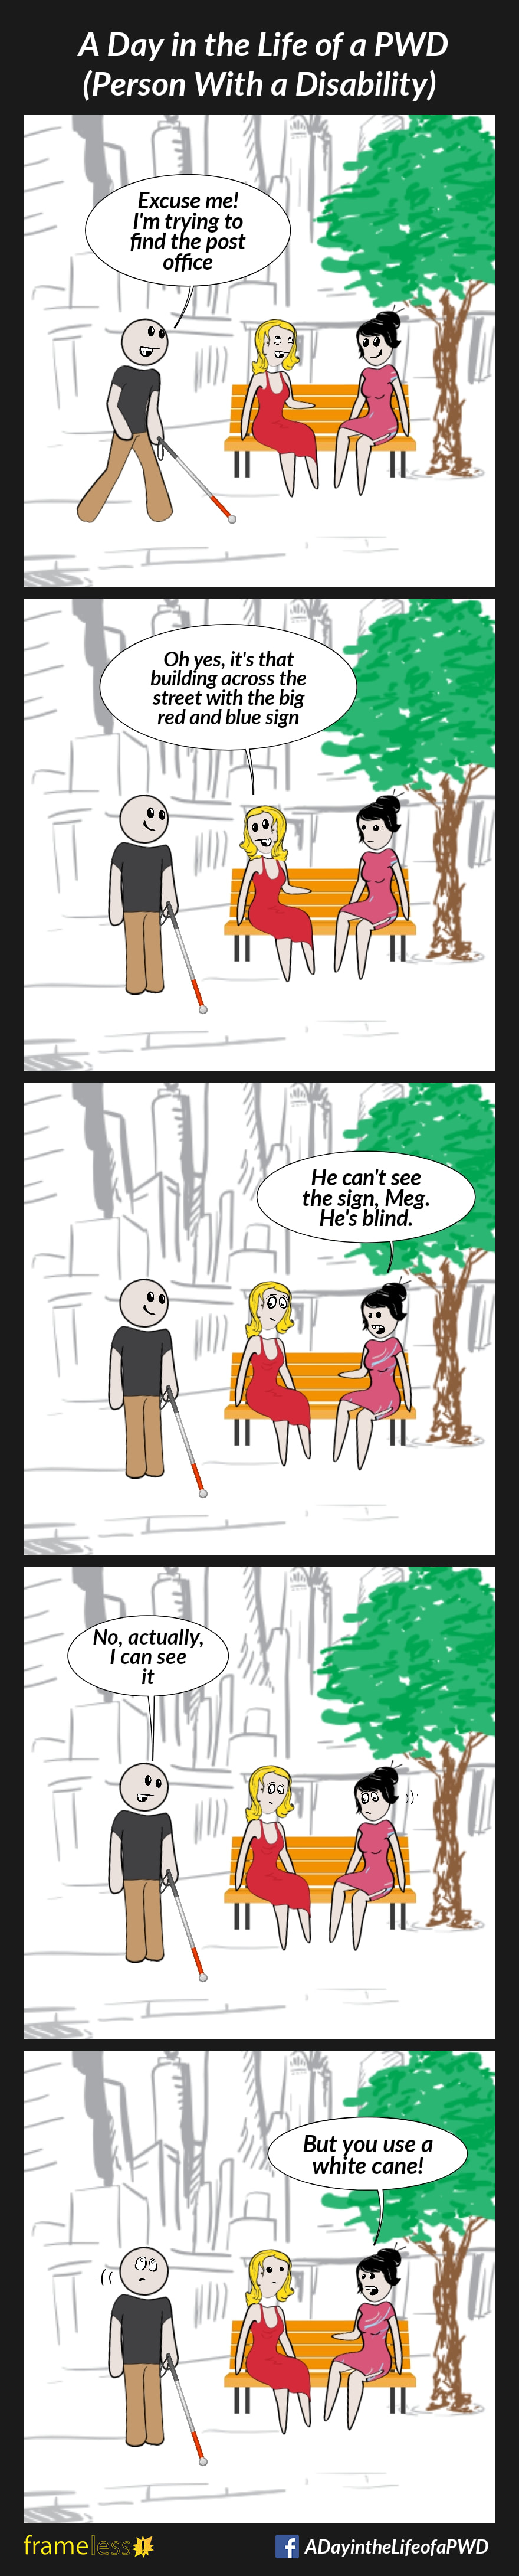 COMIC STRIP 
A Day in the Life of a PWD (Person With a Disability) 

Frame 1:
Two women are sitting on a bench, chatting. A man using a white cane approaches.
MAN: Excuse me! I'm trying to find the post office 

Frame 2:
WOMAN A: Oh yes, it's that building across the street with the big blue and red sign

Frame 3:
WOMAN B: He can't see the sign, Meg. He's blind.

Frame 4:
MAN: No, actually, I can see it

Frame 5:
WOMAN B: But you use a white cane!
The man rolls his eyes